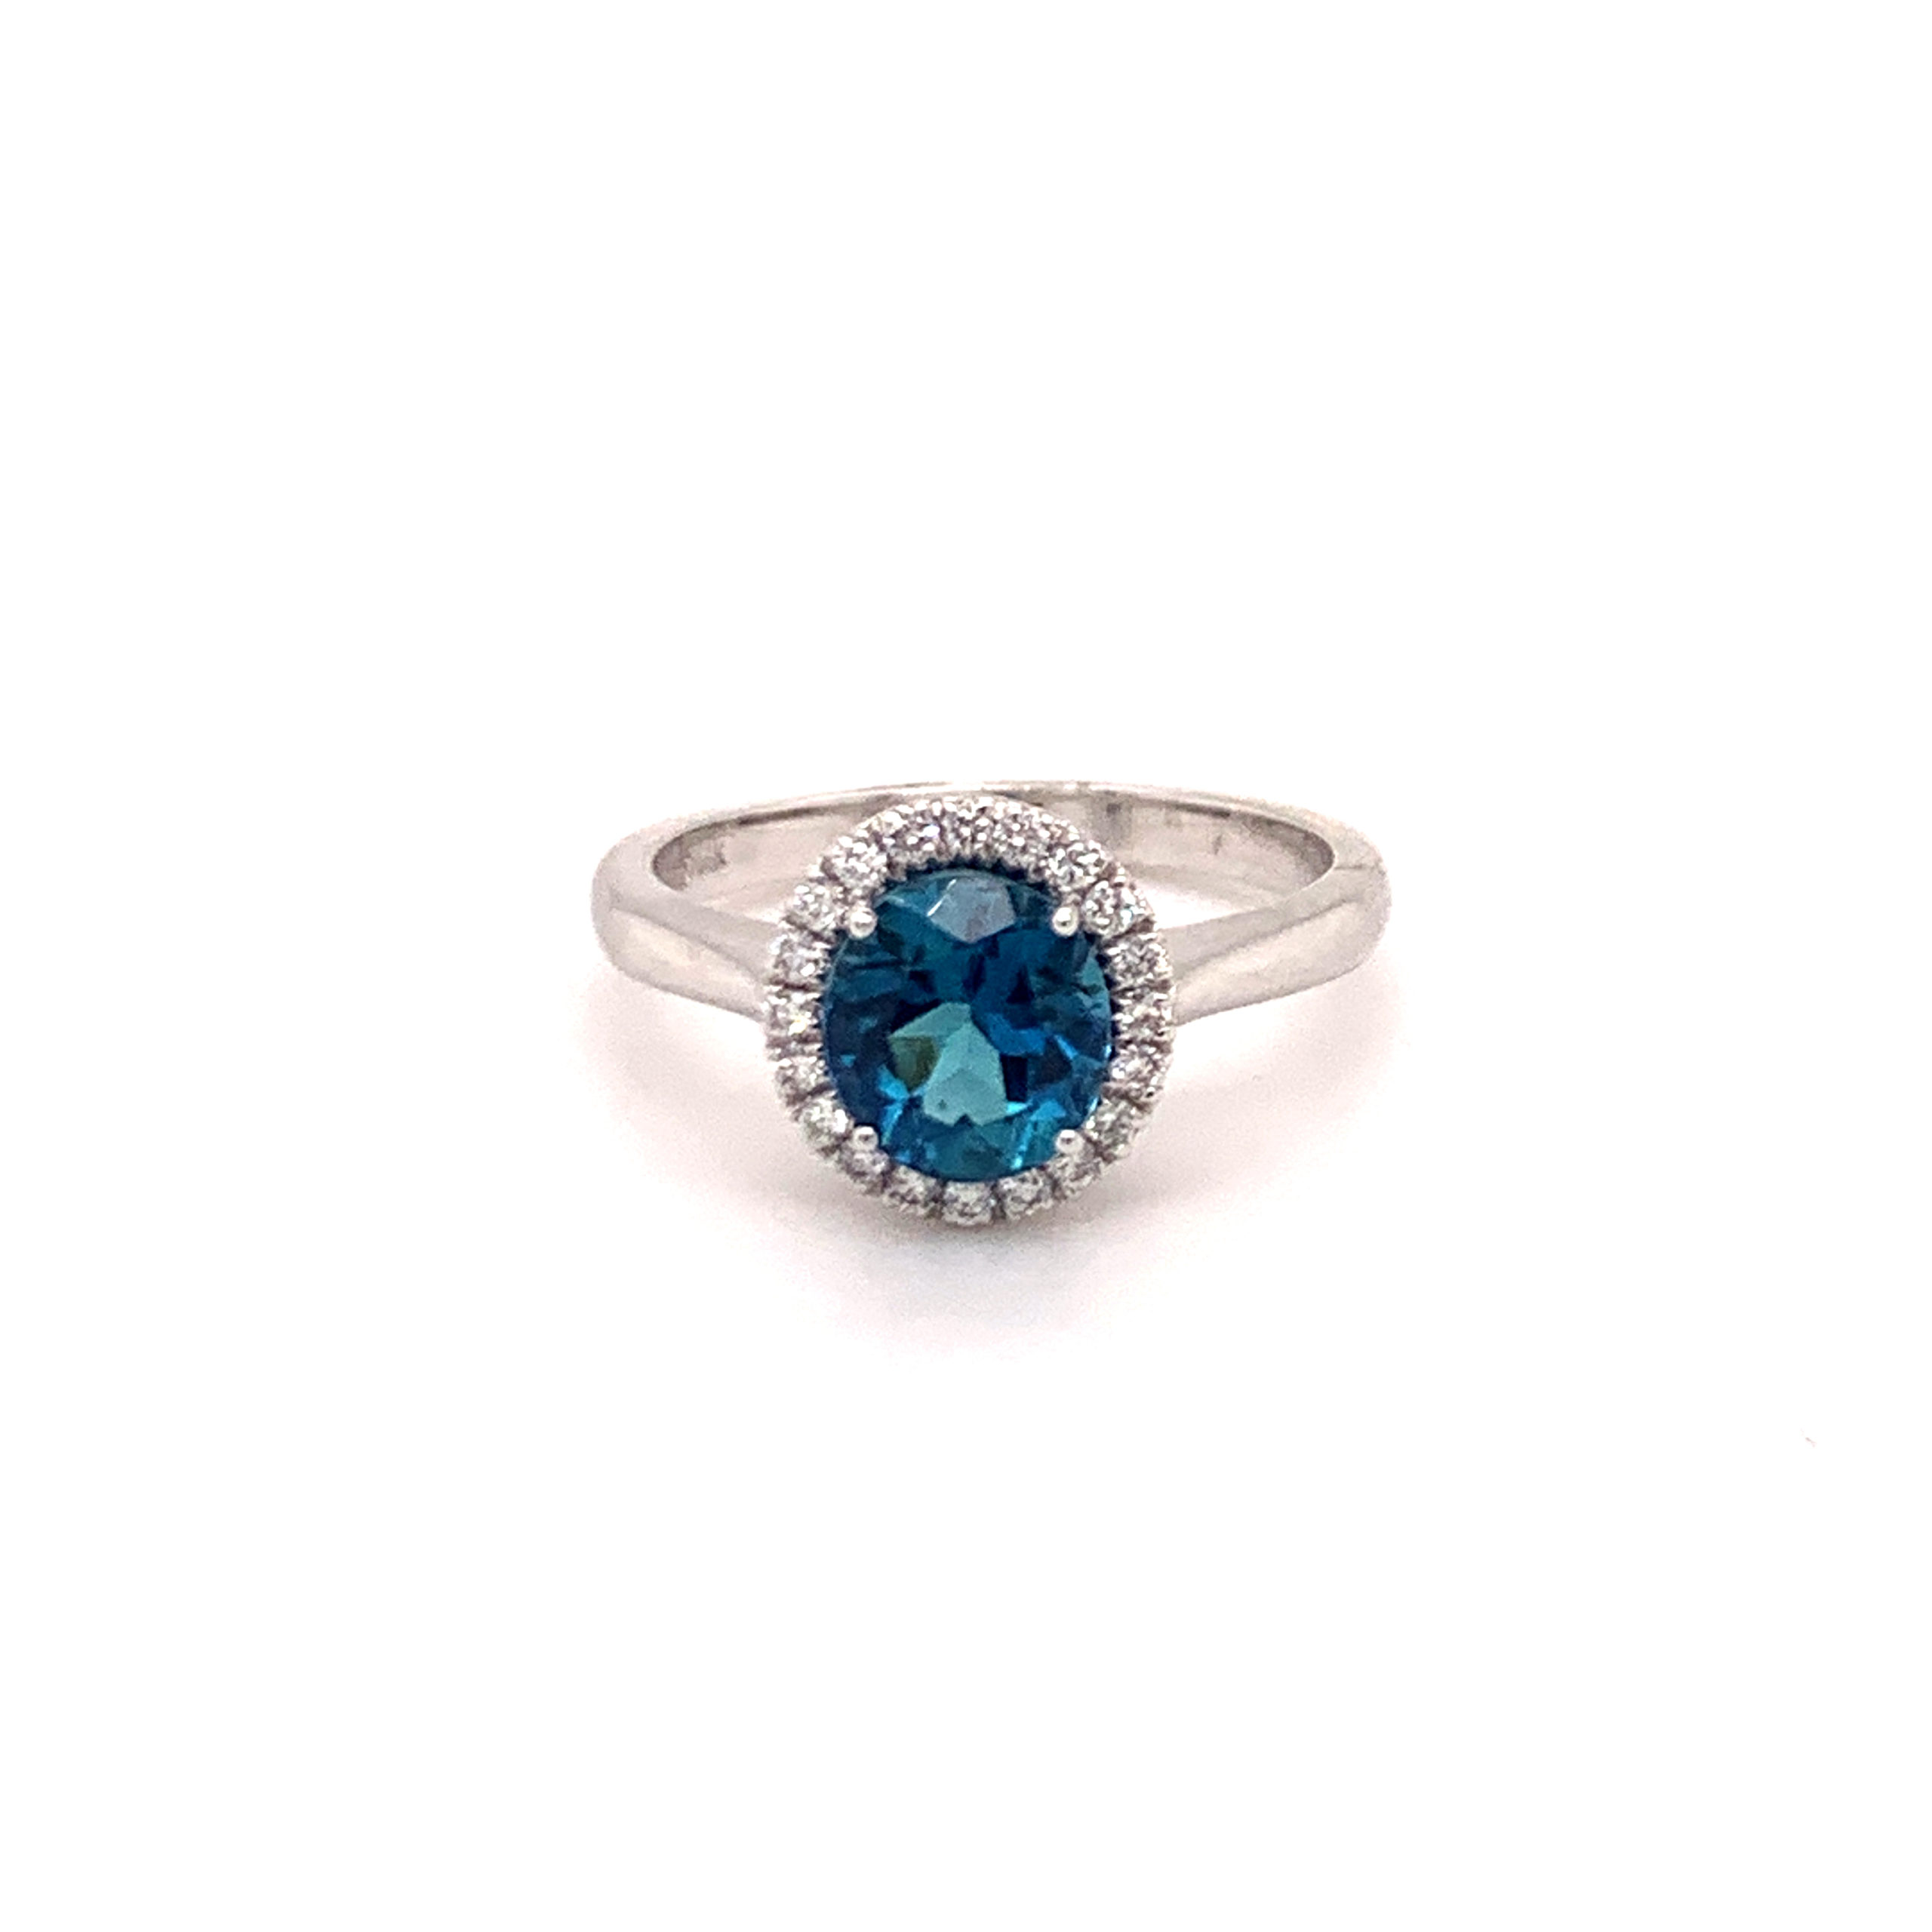 Buy Indicolite Tourmaline Oval 0.69 Carat Ring in 14K White Gold with  Accent Diamonds | BestinGems